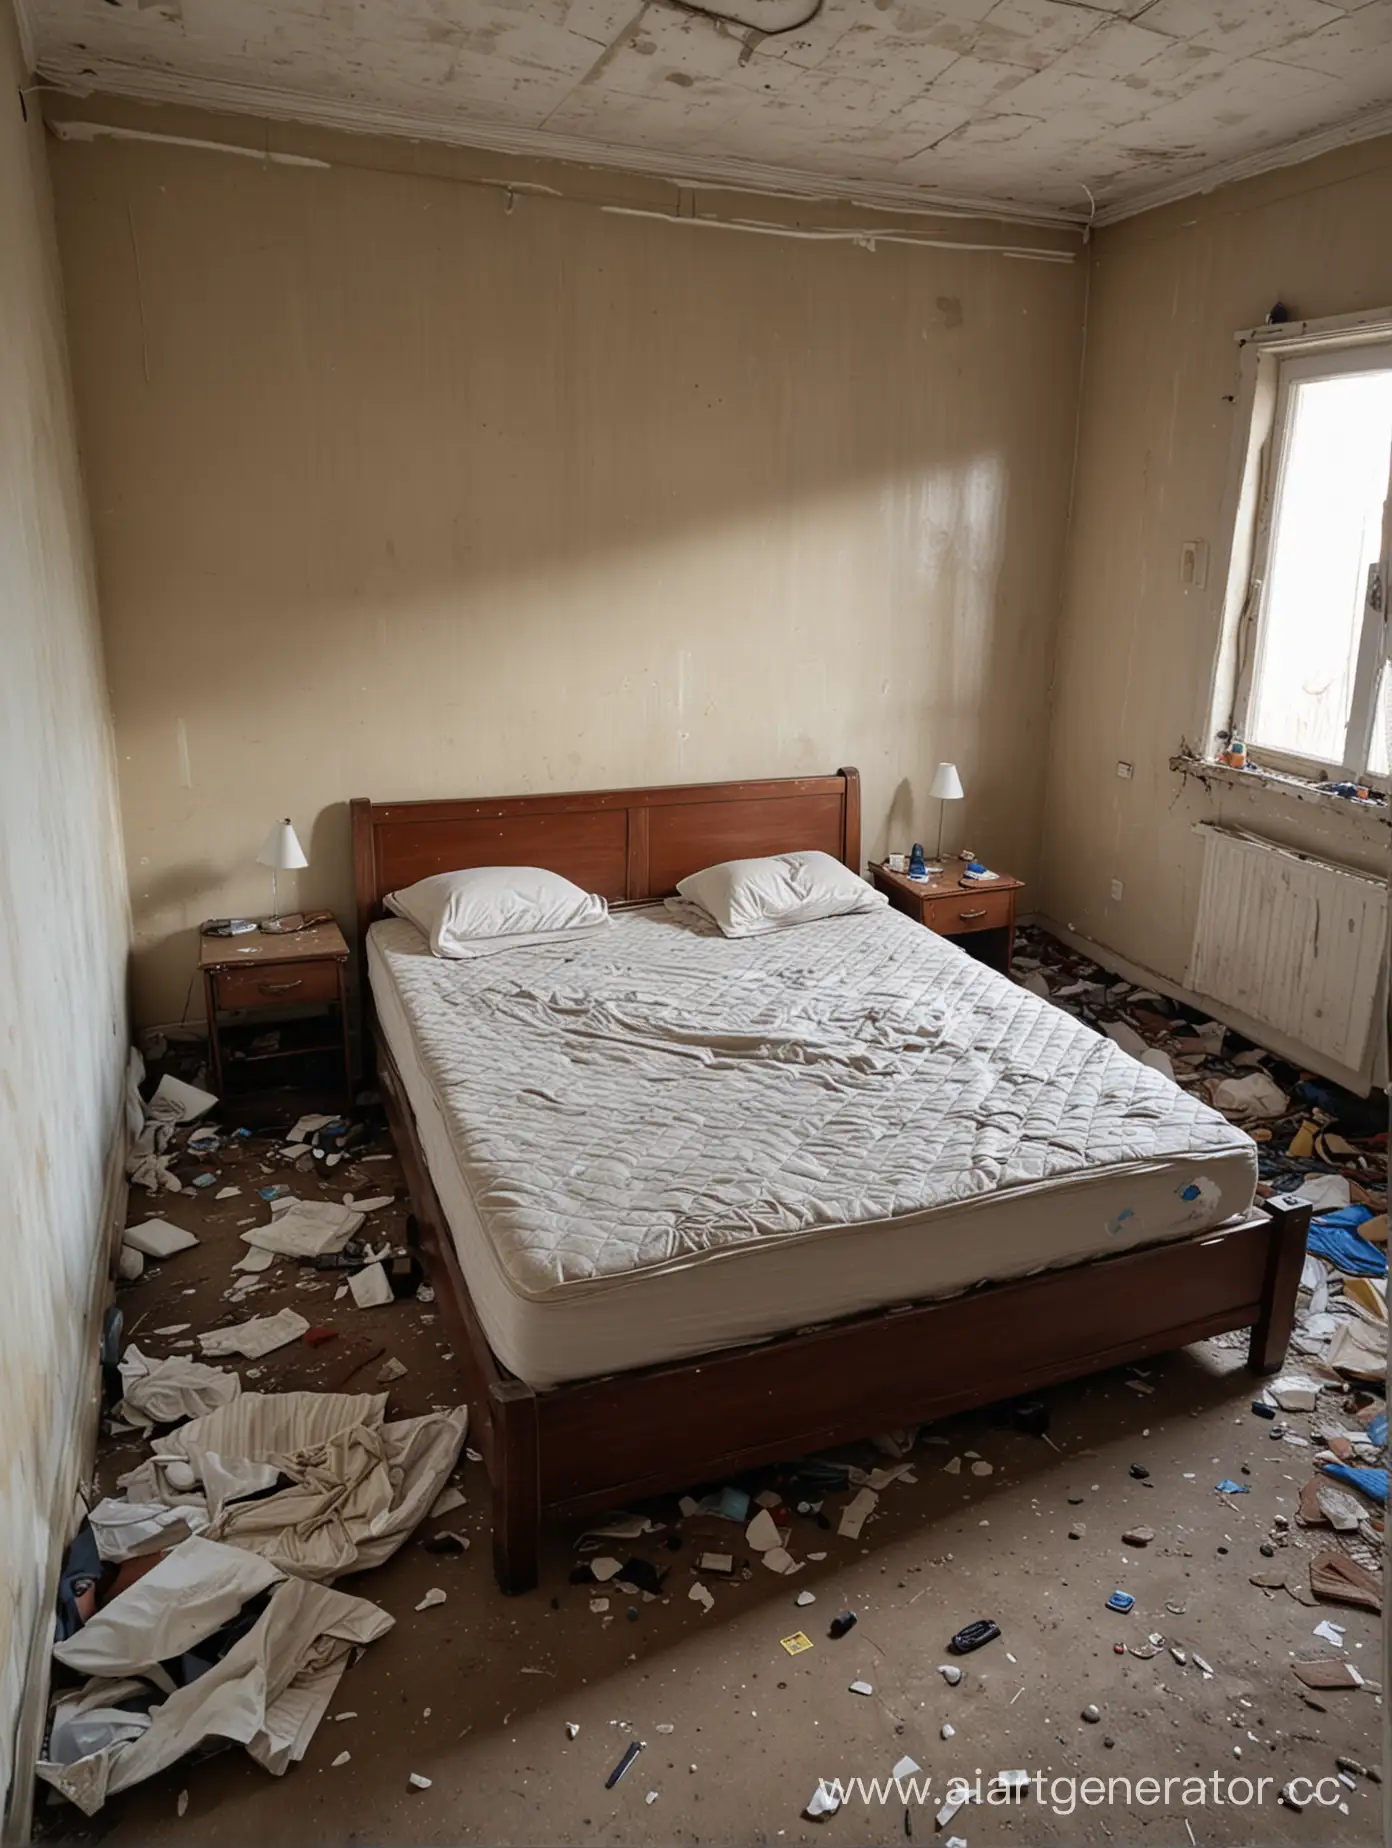 Chaotic-Bedroom-Scene-with-Unmade-Bed